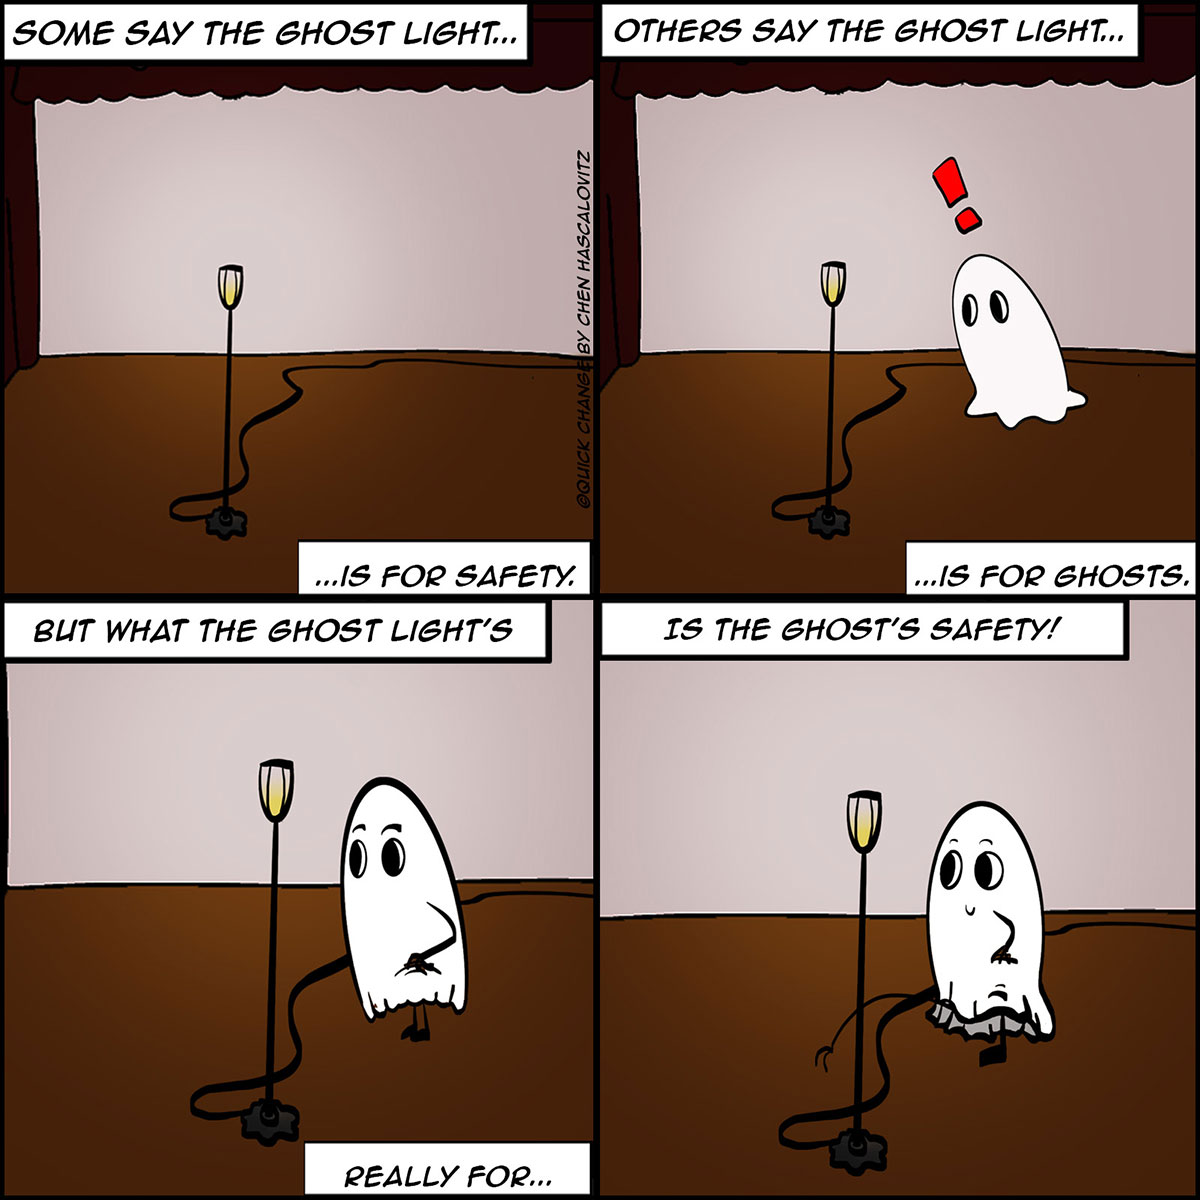 Four panel comic illustrating the ghost light on the theatre stage.